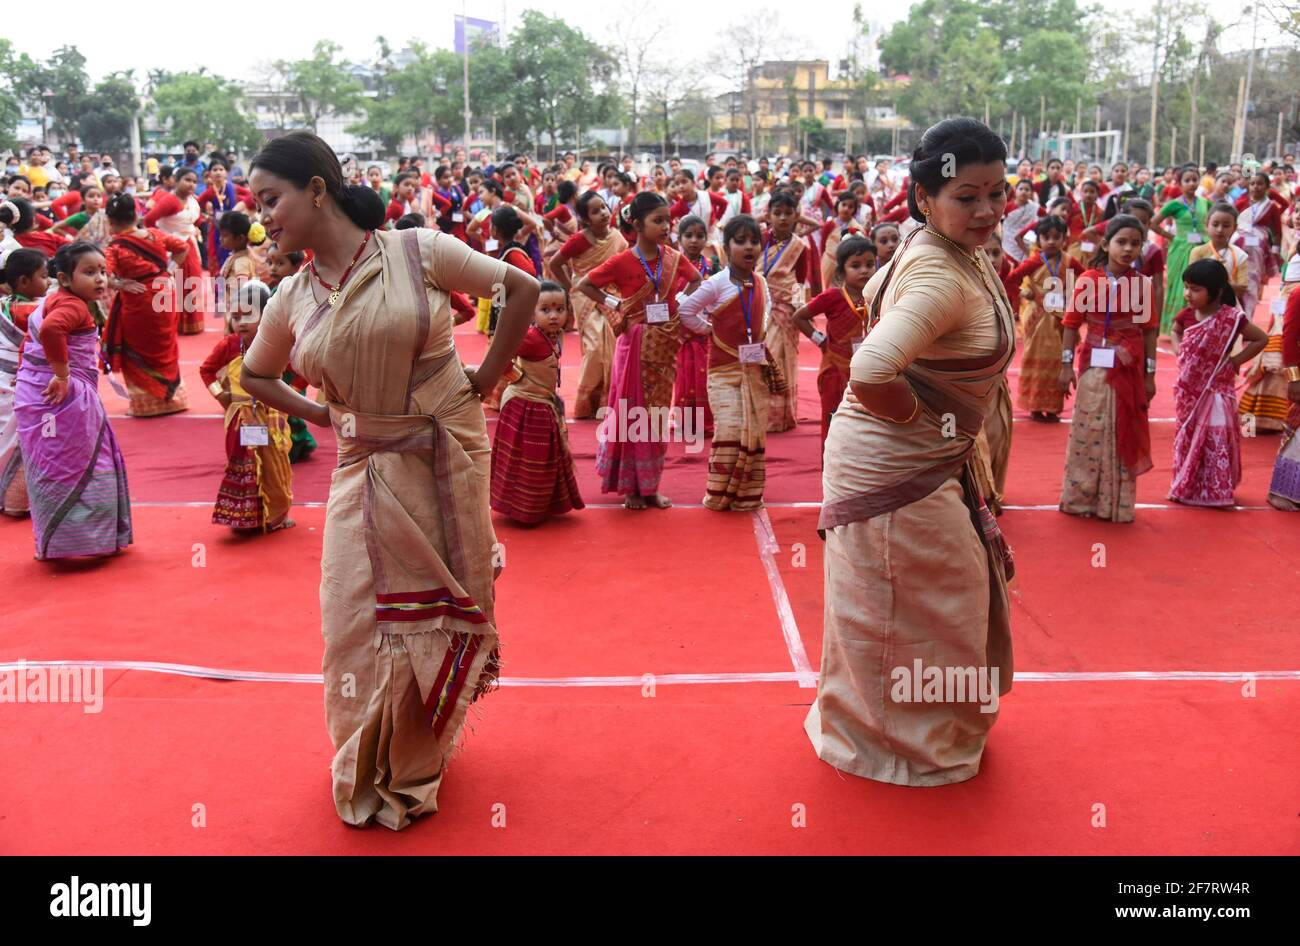 Assam, India. 9th Apr 2021. Woman and girls dancing as they are participated in a Bihu folk dance workshop ahead of Rongali Bihu Festival on April 09, 2021 in Guwahati, Assam, India. Bihu dance is an indigenous folk dance from the Indian state of Assam related to the Bihu festival and an important part of Assamese culture. Credit: David Talukdar/Alamy Live News Stock Photo